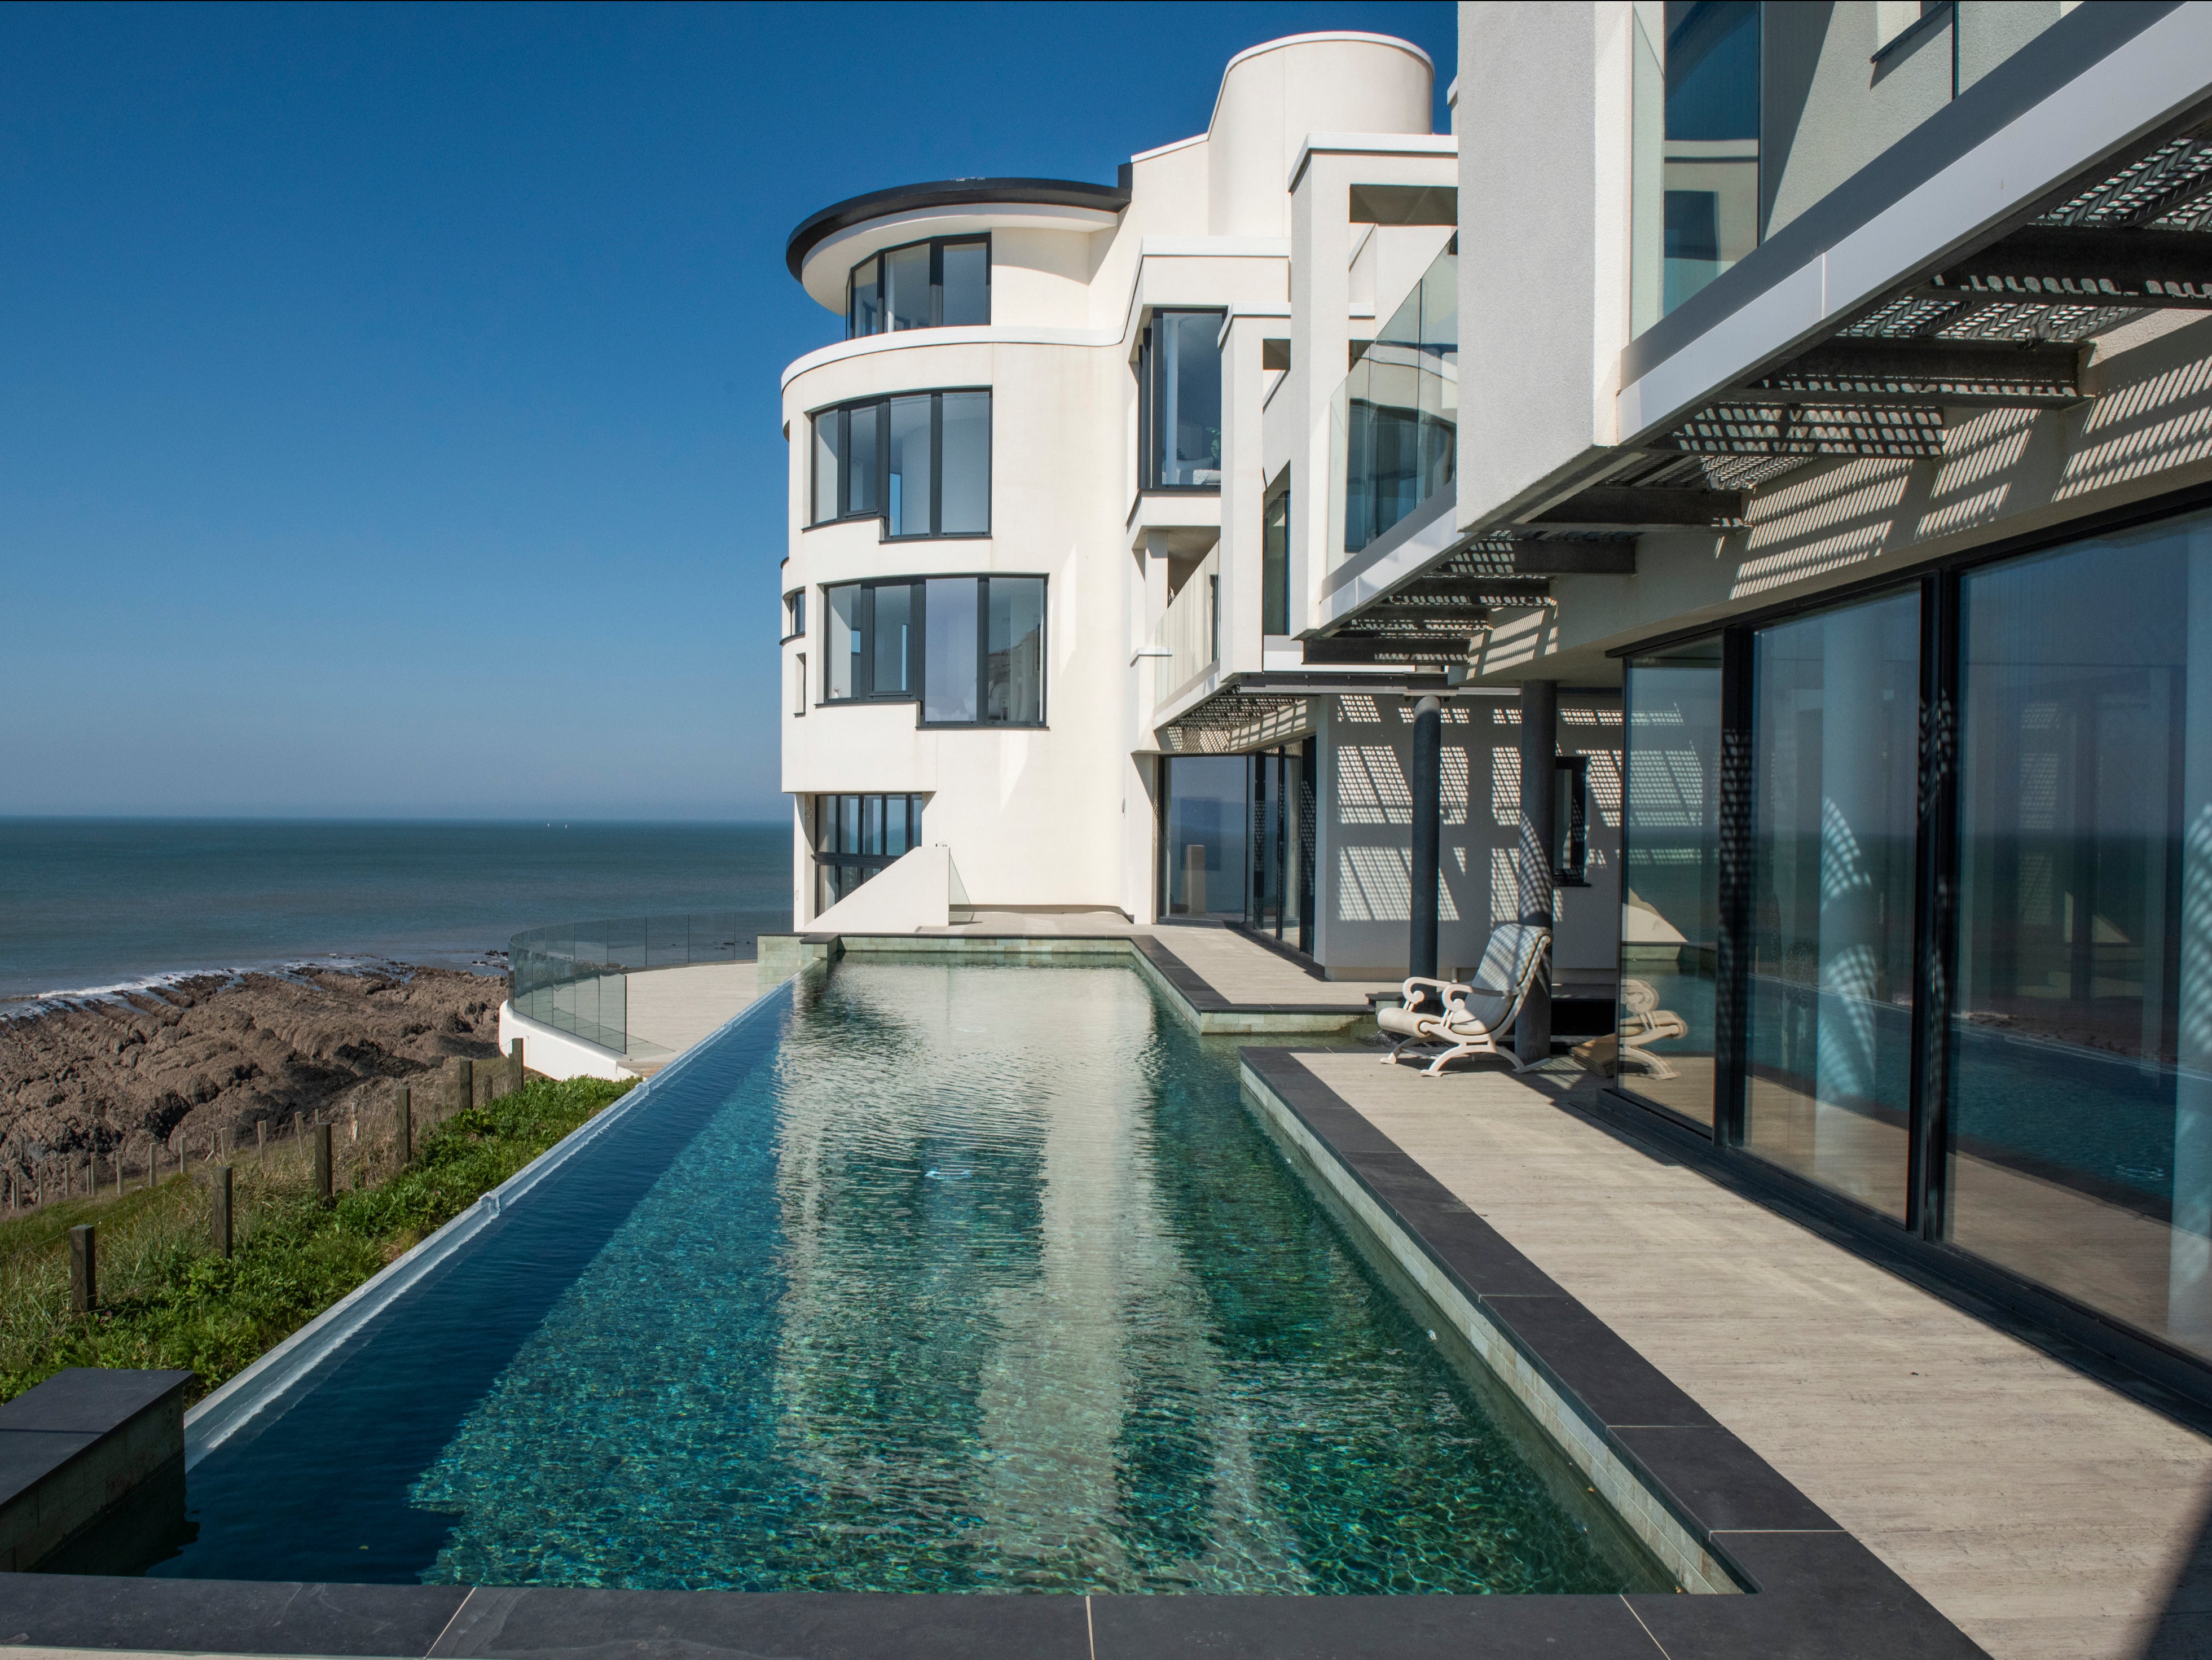 The infinity pool with views of the sea